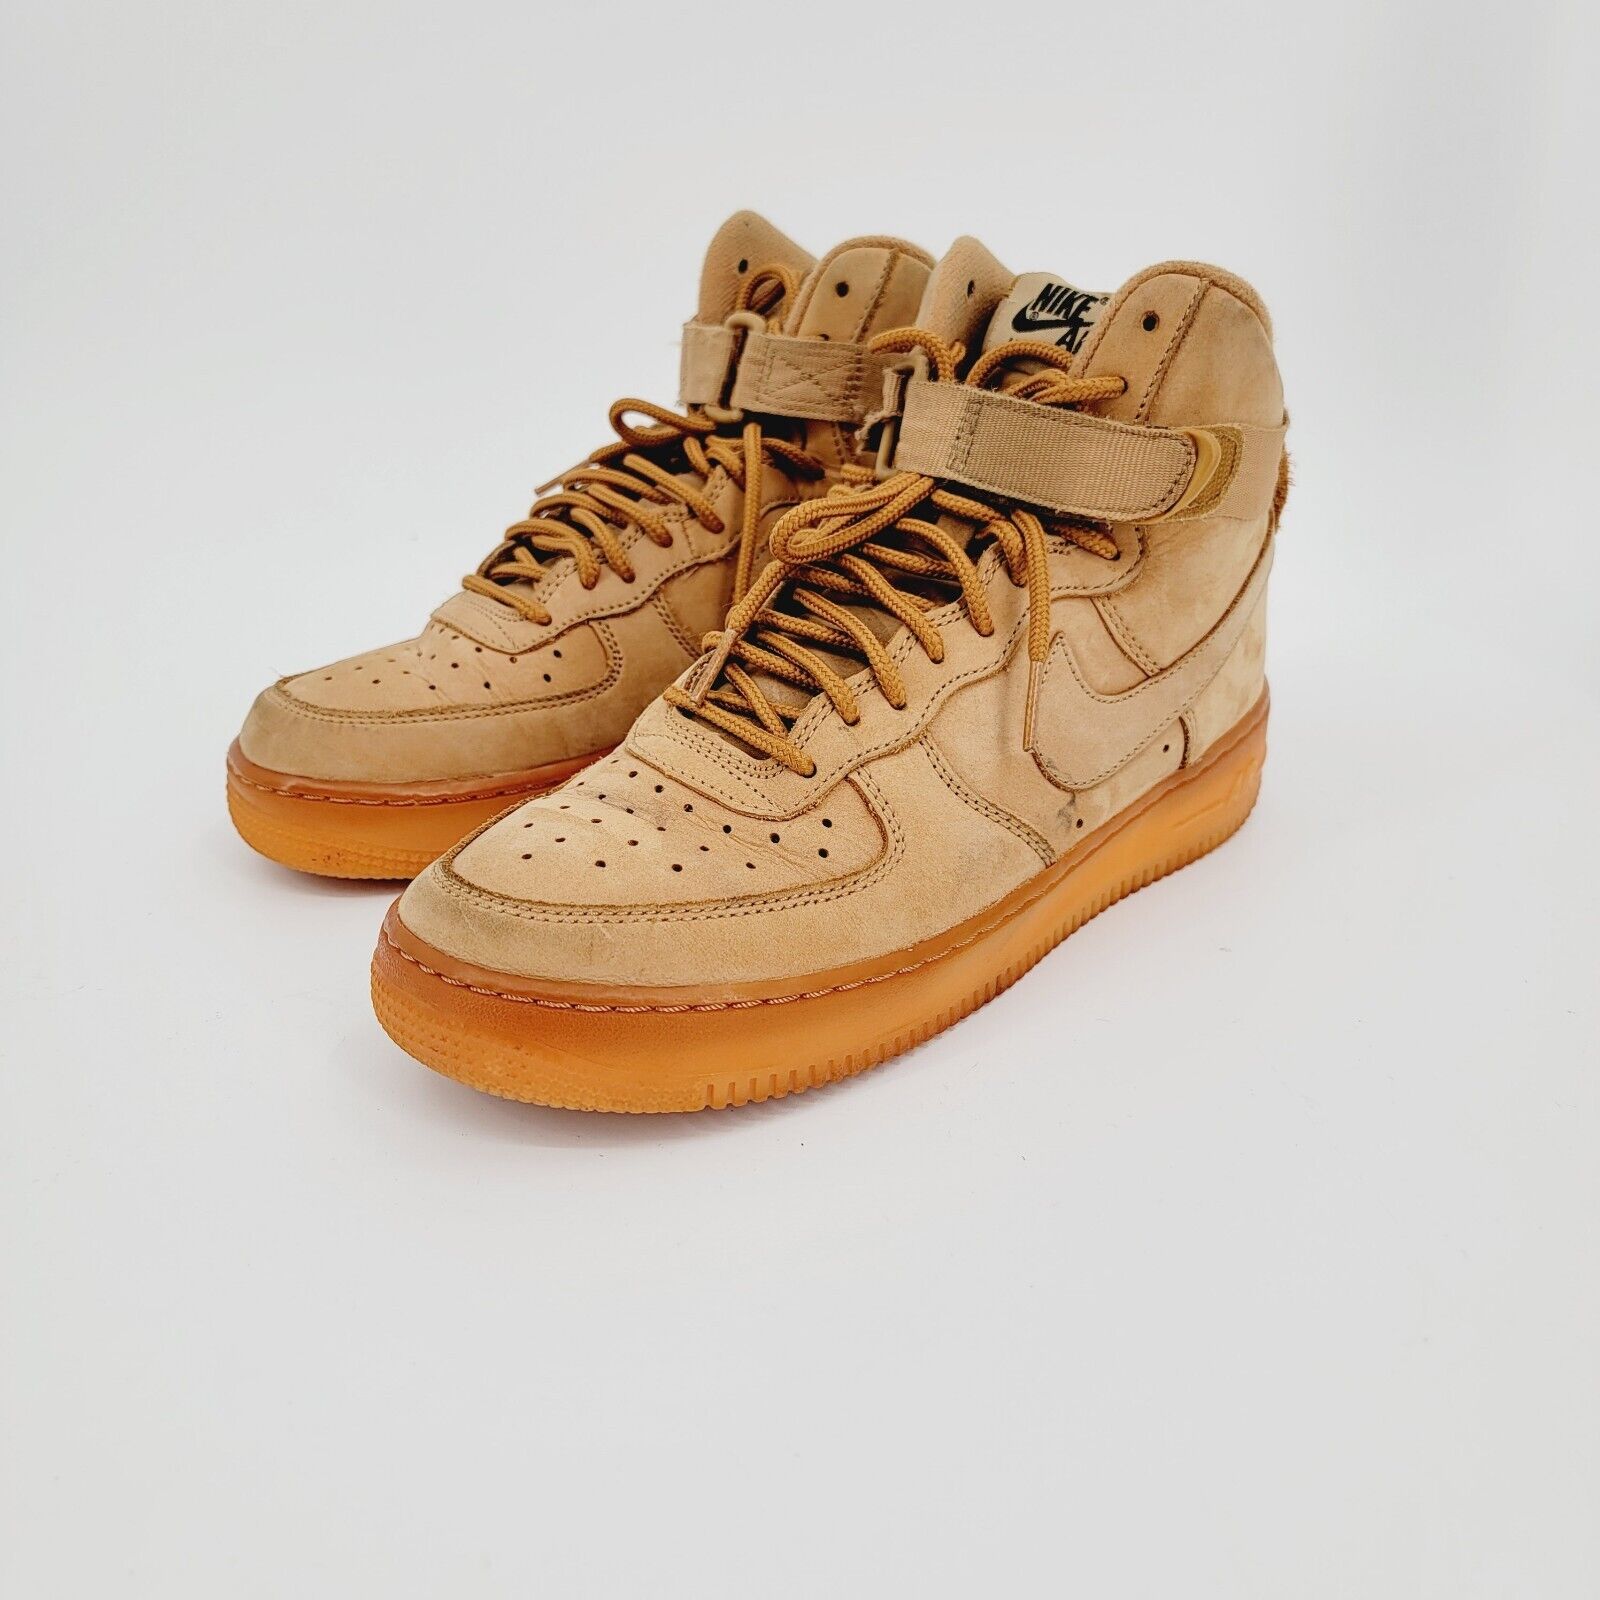 wheat air force 1 size 7